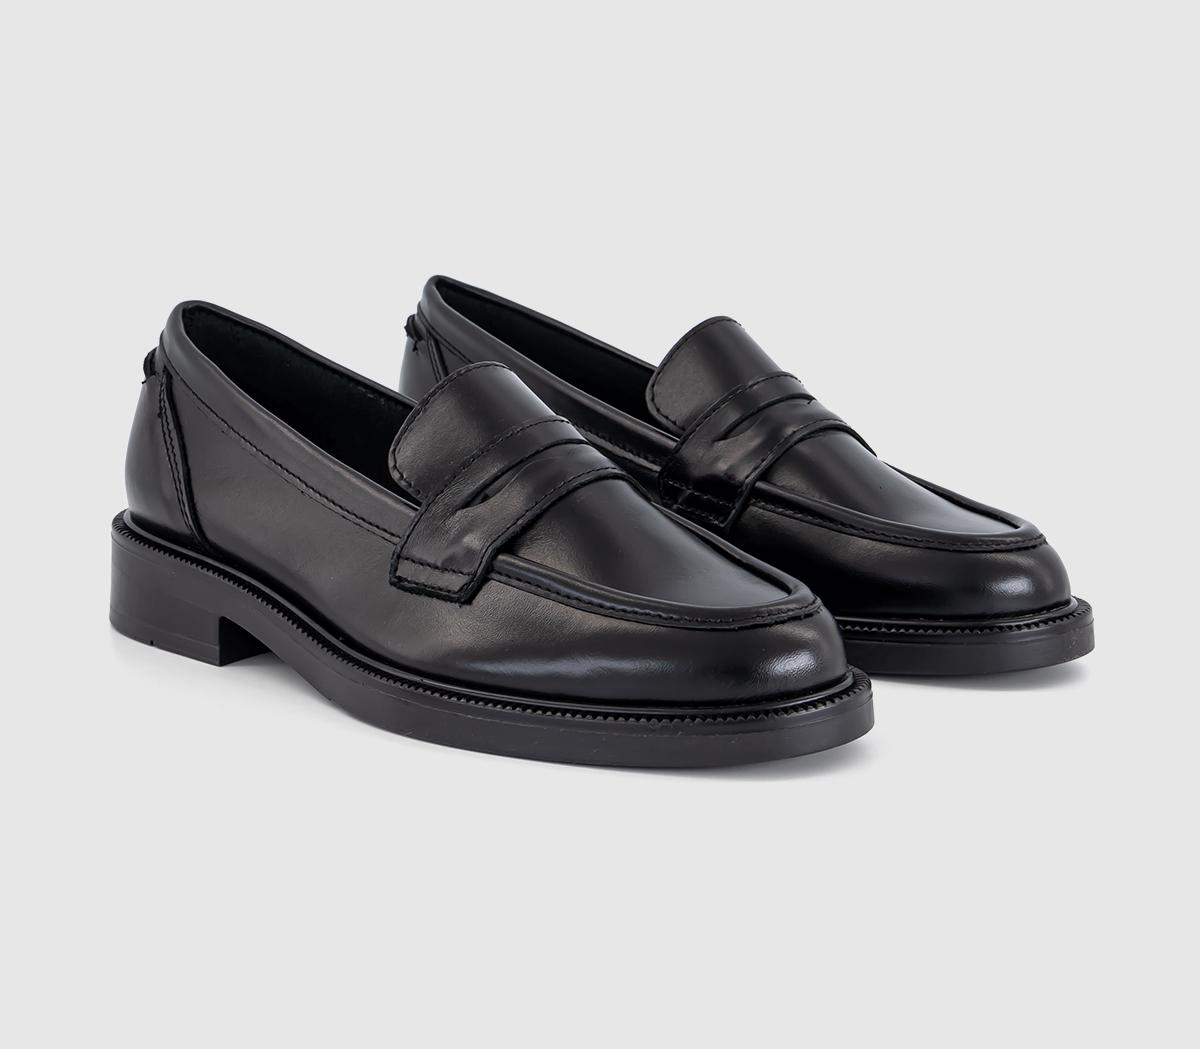 OFFICE Forgive Penny Leather Loafers Black Leather - Flat Shoes for Women